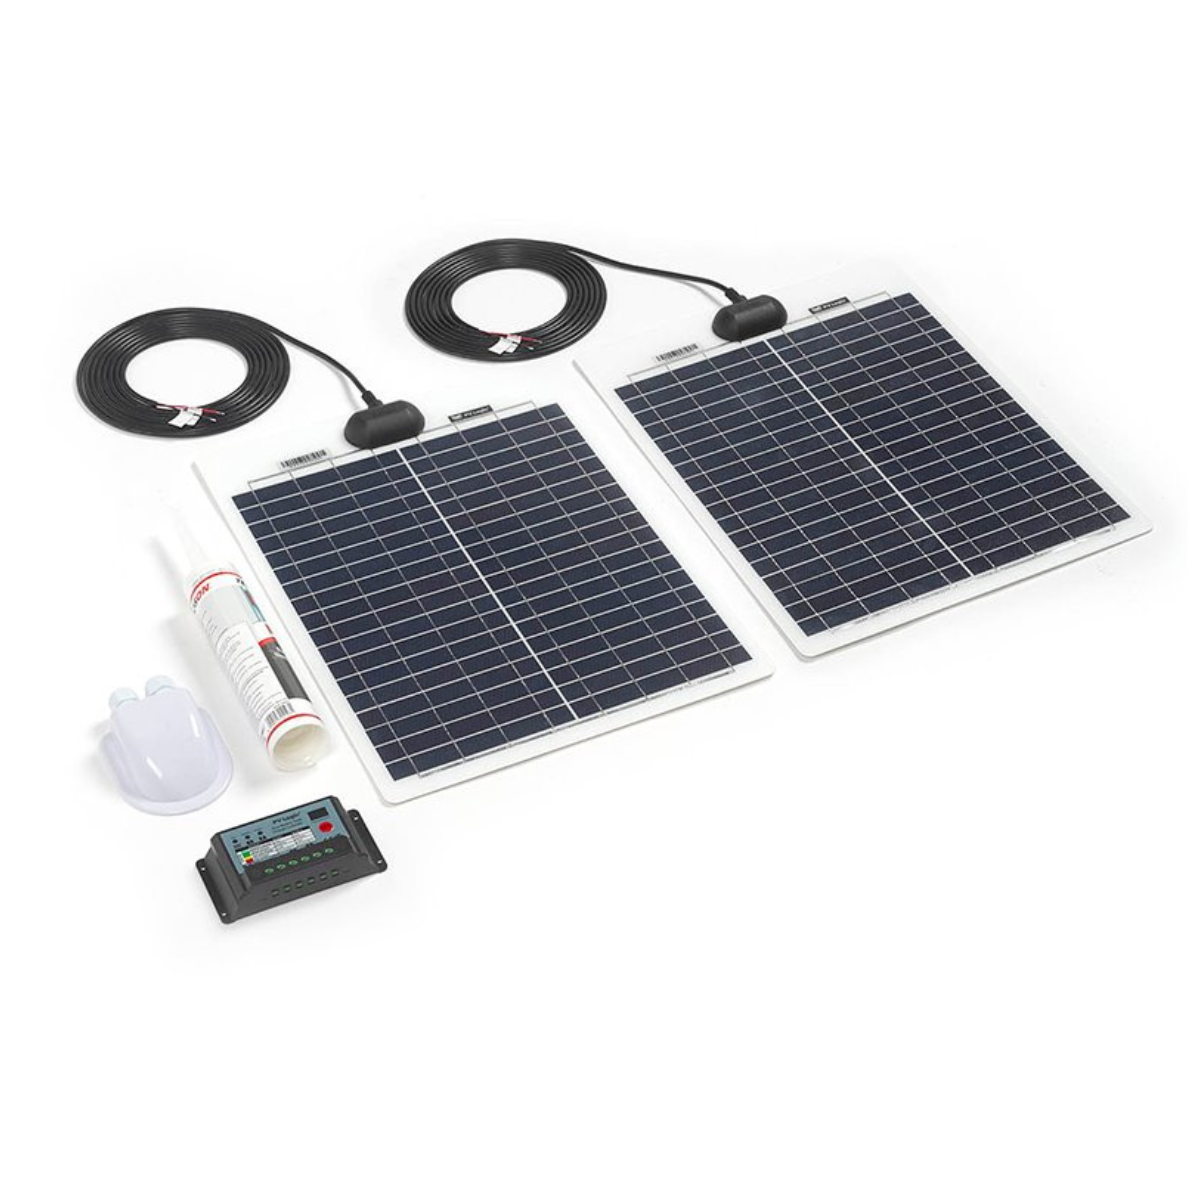 The Premium rigid solar panel comes with everything you need to connect to your engine's starter motor making it the best insurance policy you'll buy this year.